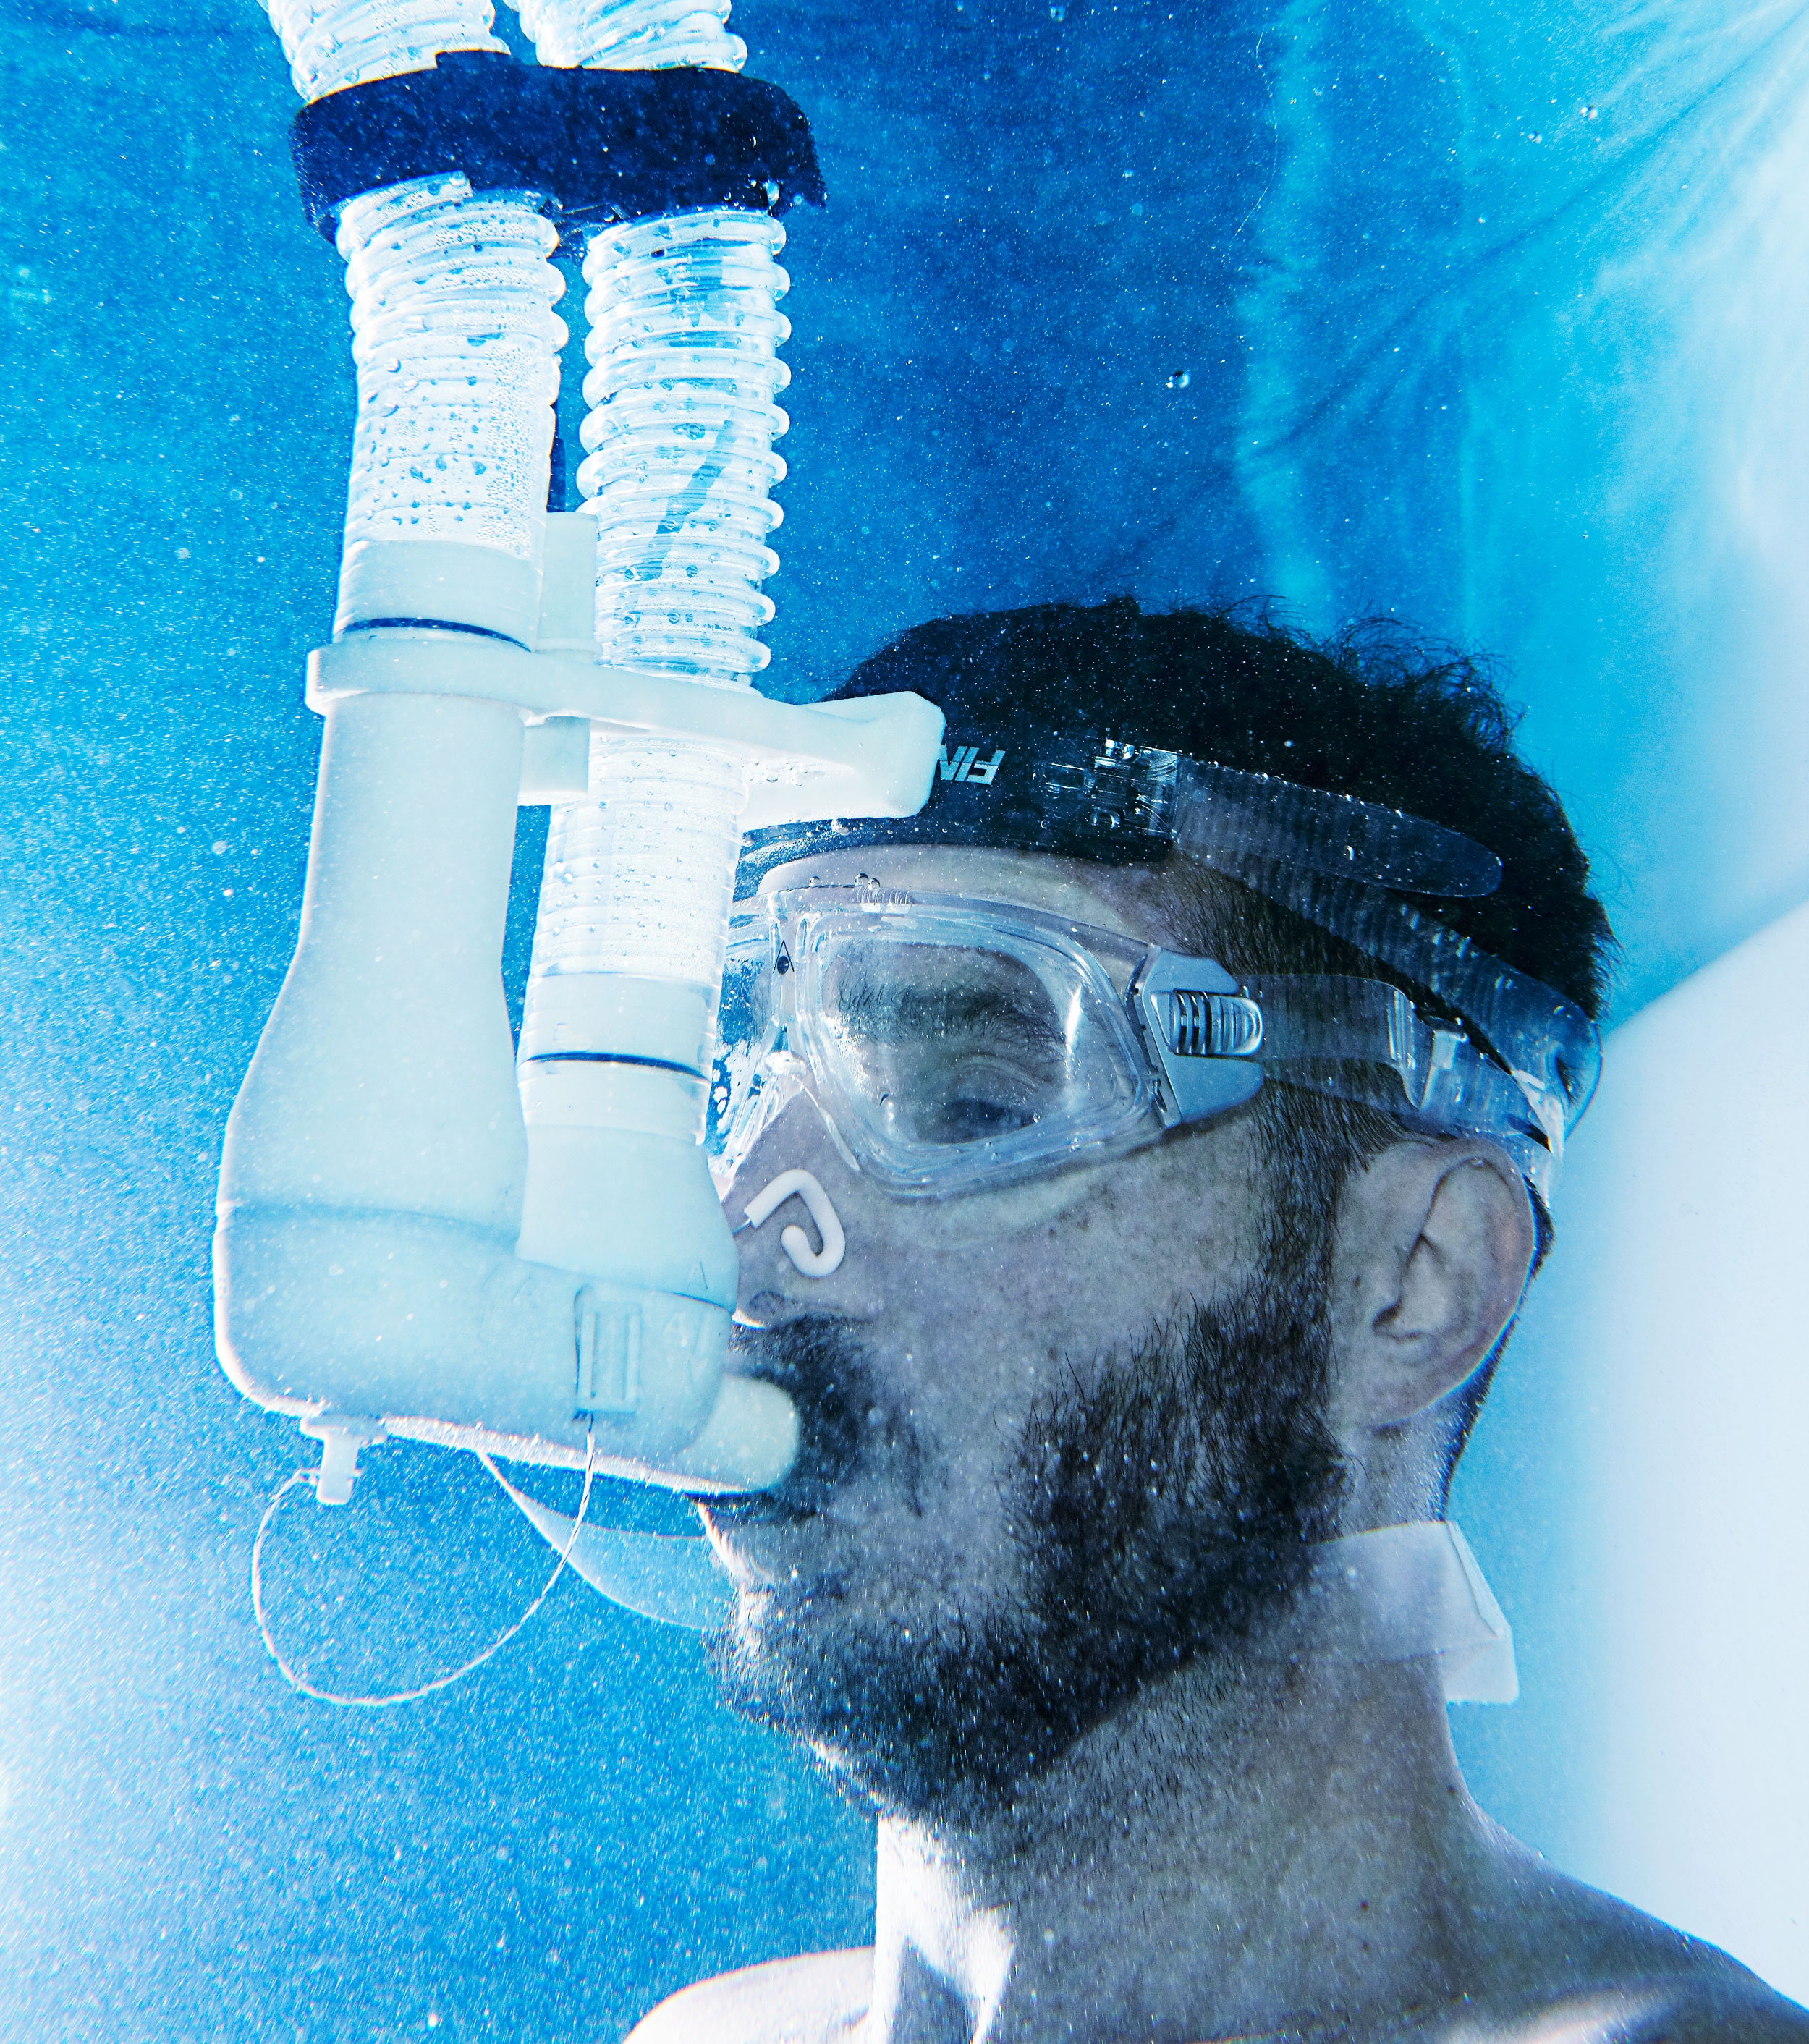 The Cosmed Quark CPET, a $30,000 snorkel contraption, analyzes writer Steven Leckart’s breathing to chart how the cold water is affecting his metabolism.PHOTOGRAPH: ANDREW TINGLE